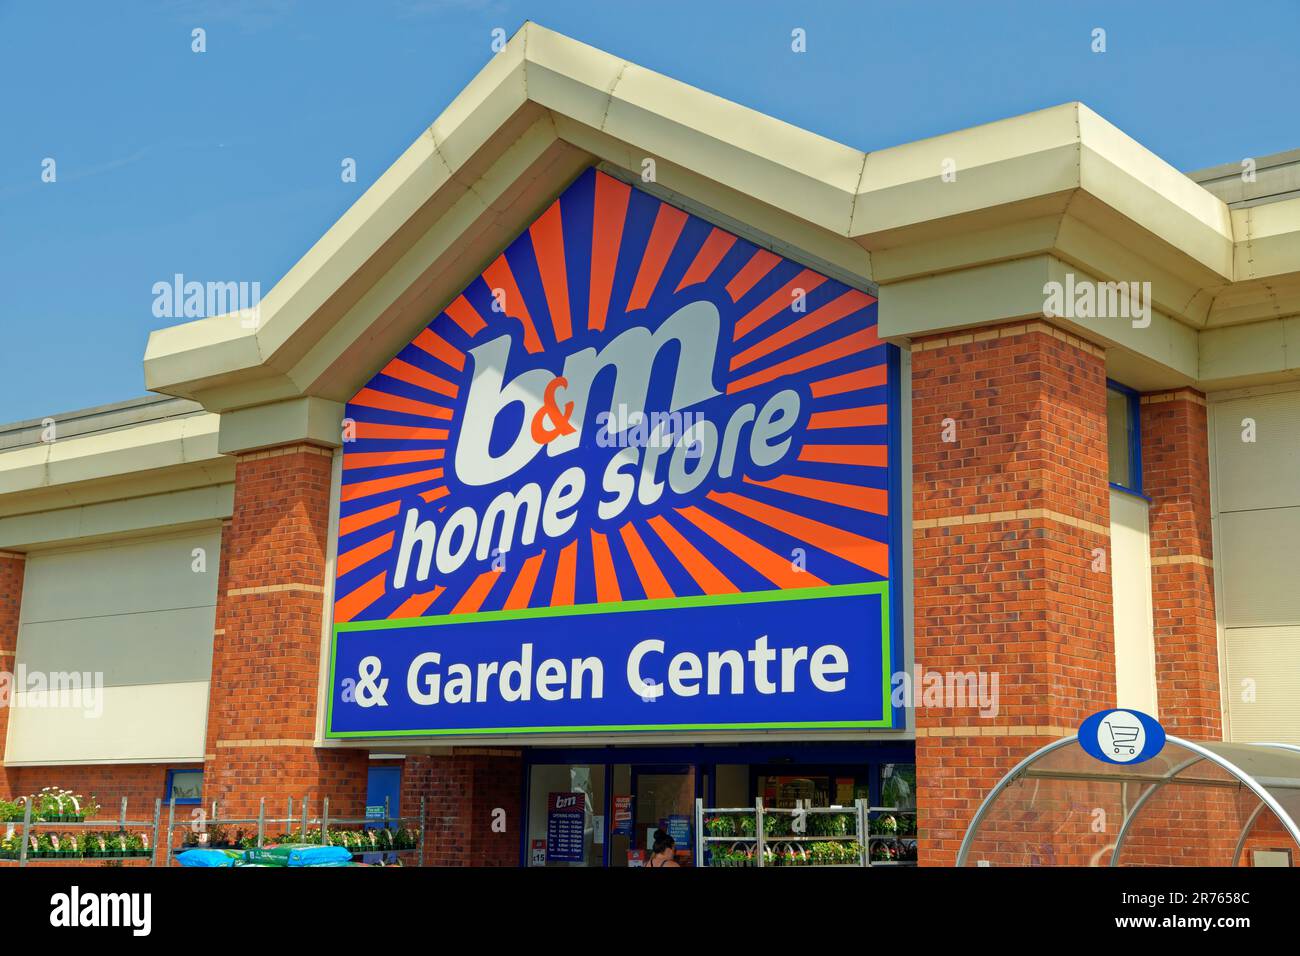 B&M home store and Garden Centre at Warrington in Cheshire, England. Stock Photo